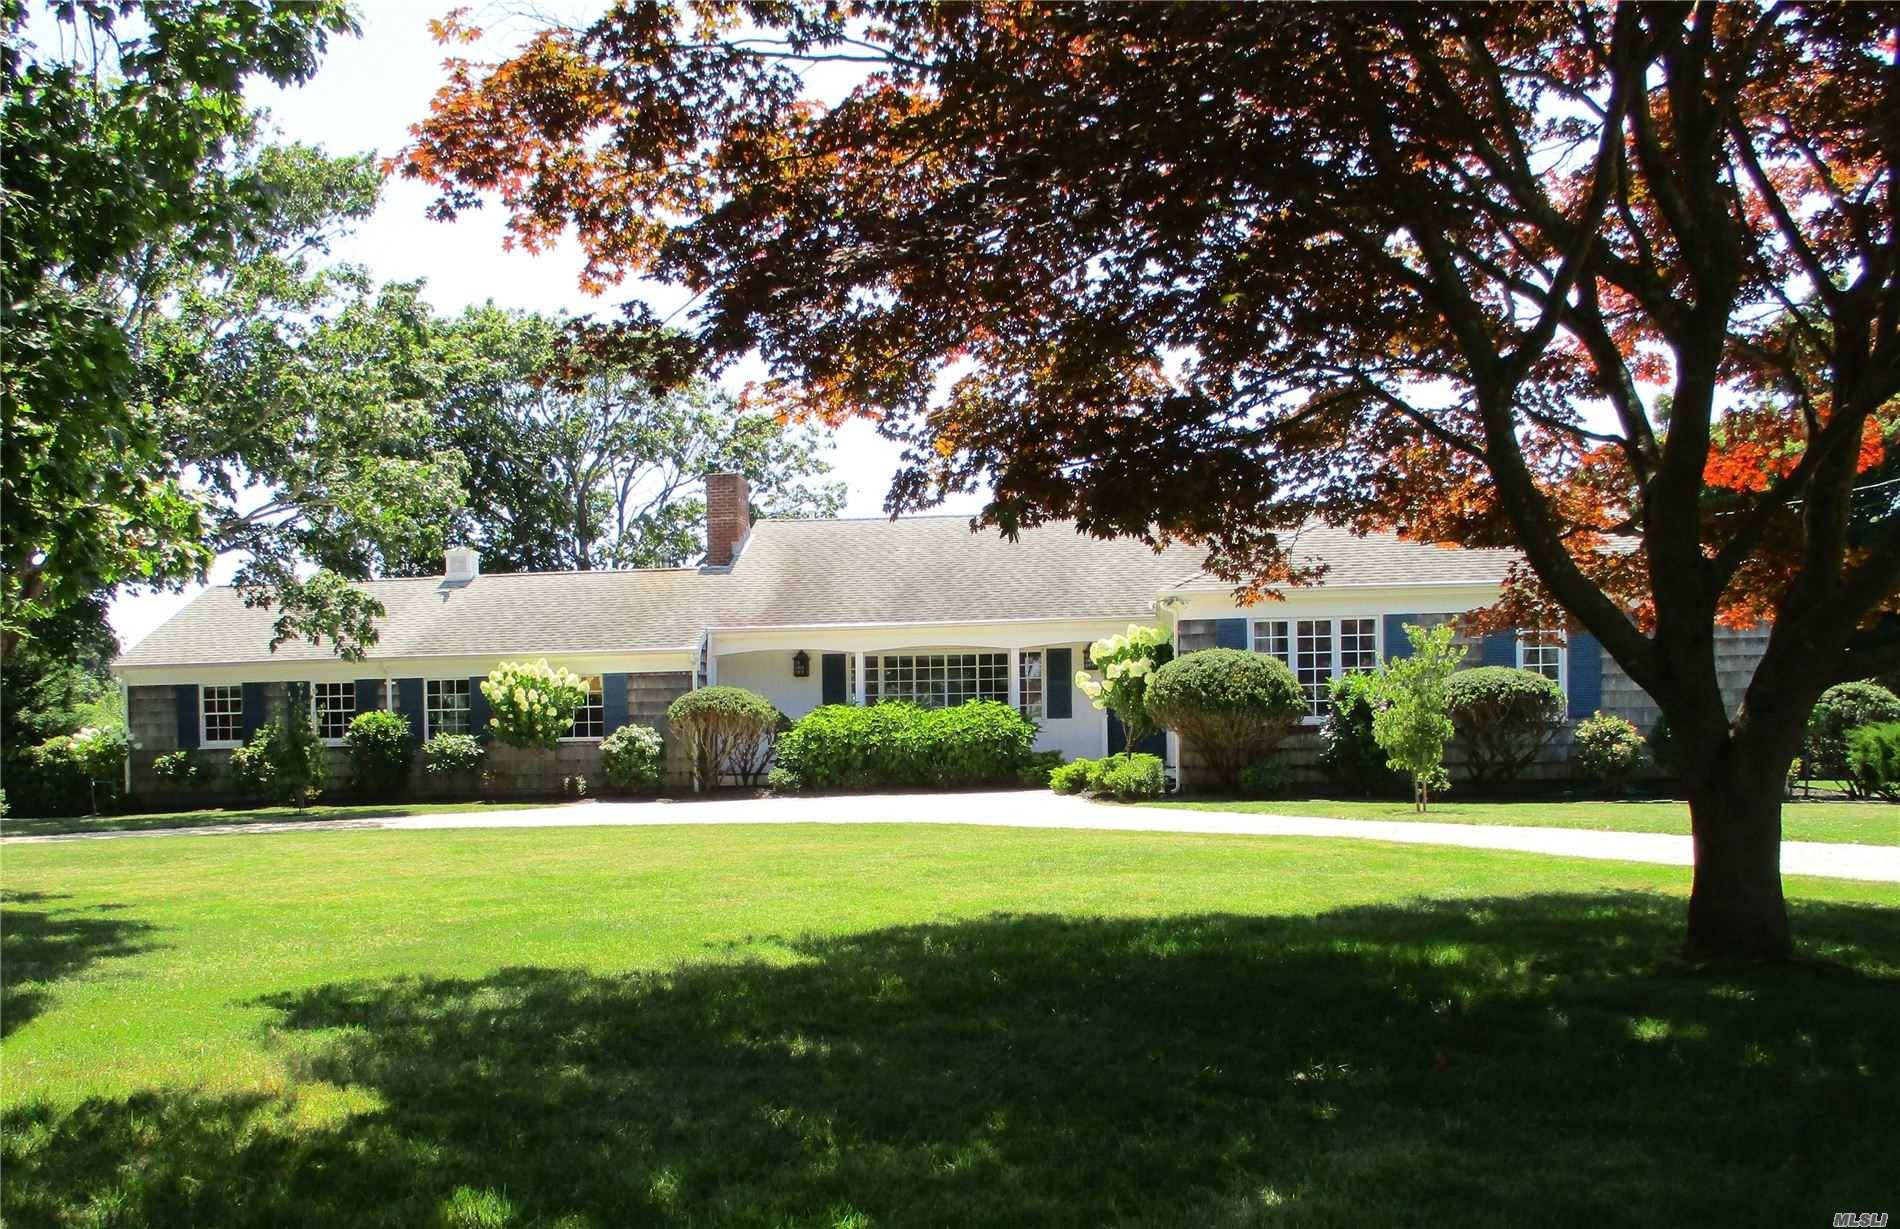 QUOGUE ESTATE SECTION OPPORTUNITY Perfectly situated on one of the last available parcels in the heart of Quogue's estate section, this bright mid century cottage is the perfect summer getaway.